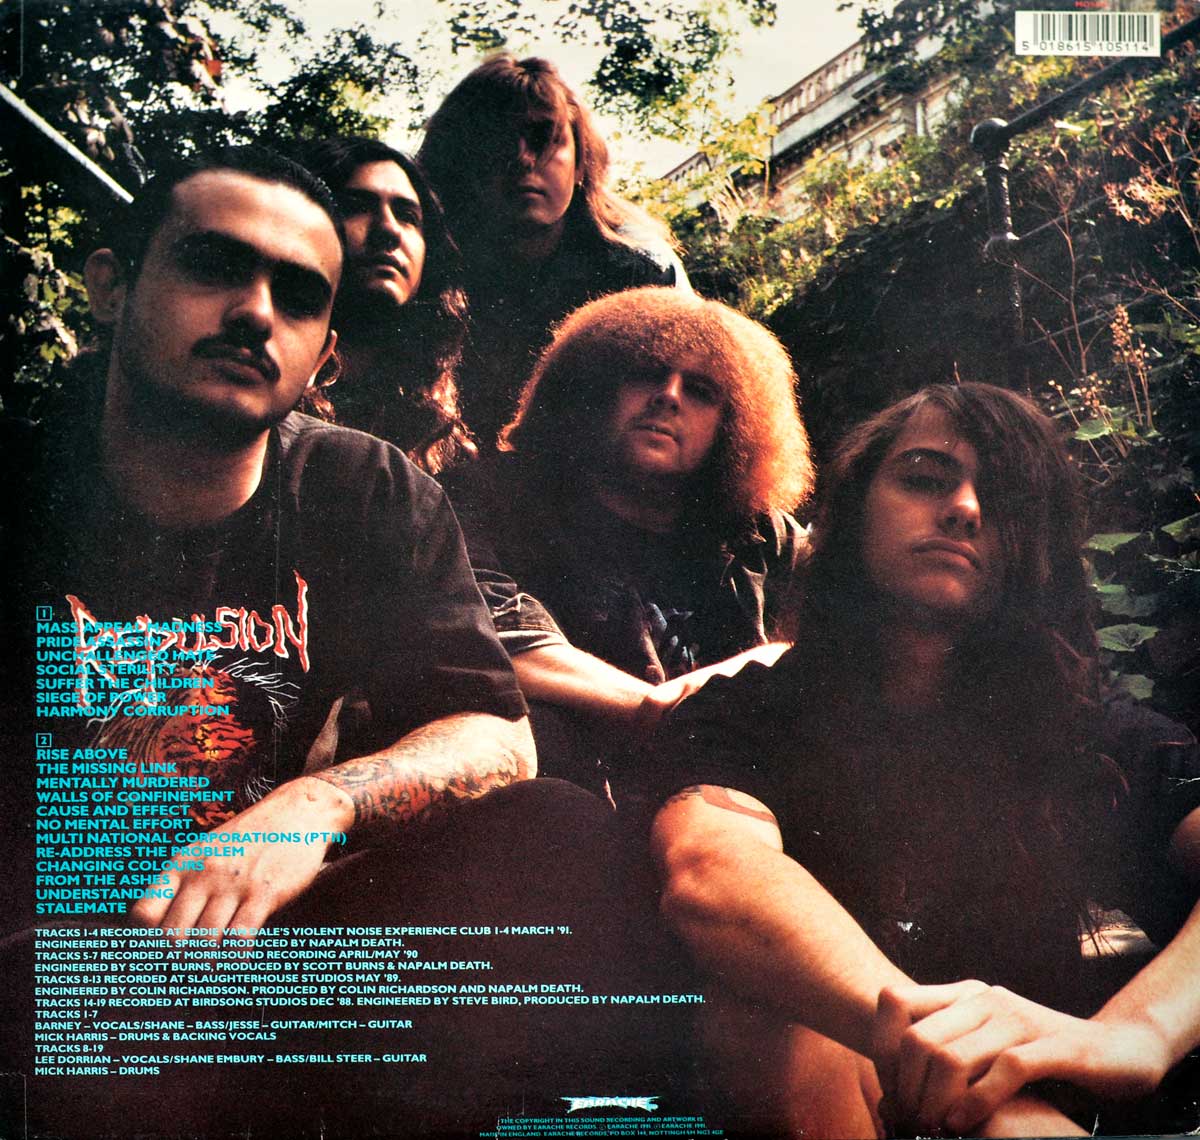 Photo Of The 5 Napalm Death Band-Members On The Album Back Cover Of "Napalm Death Death By Manipulation"